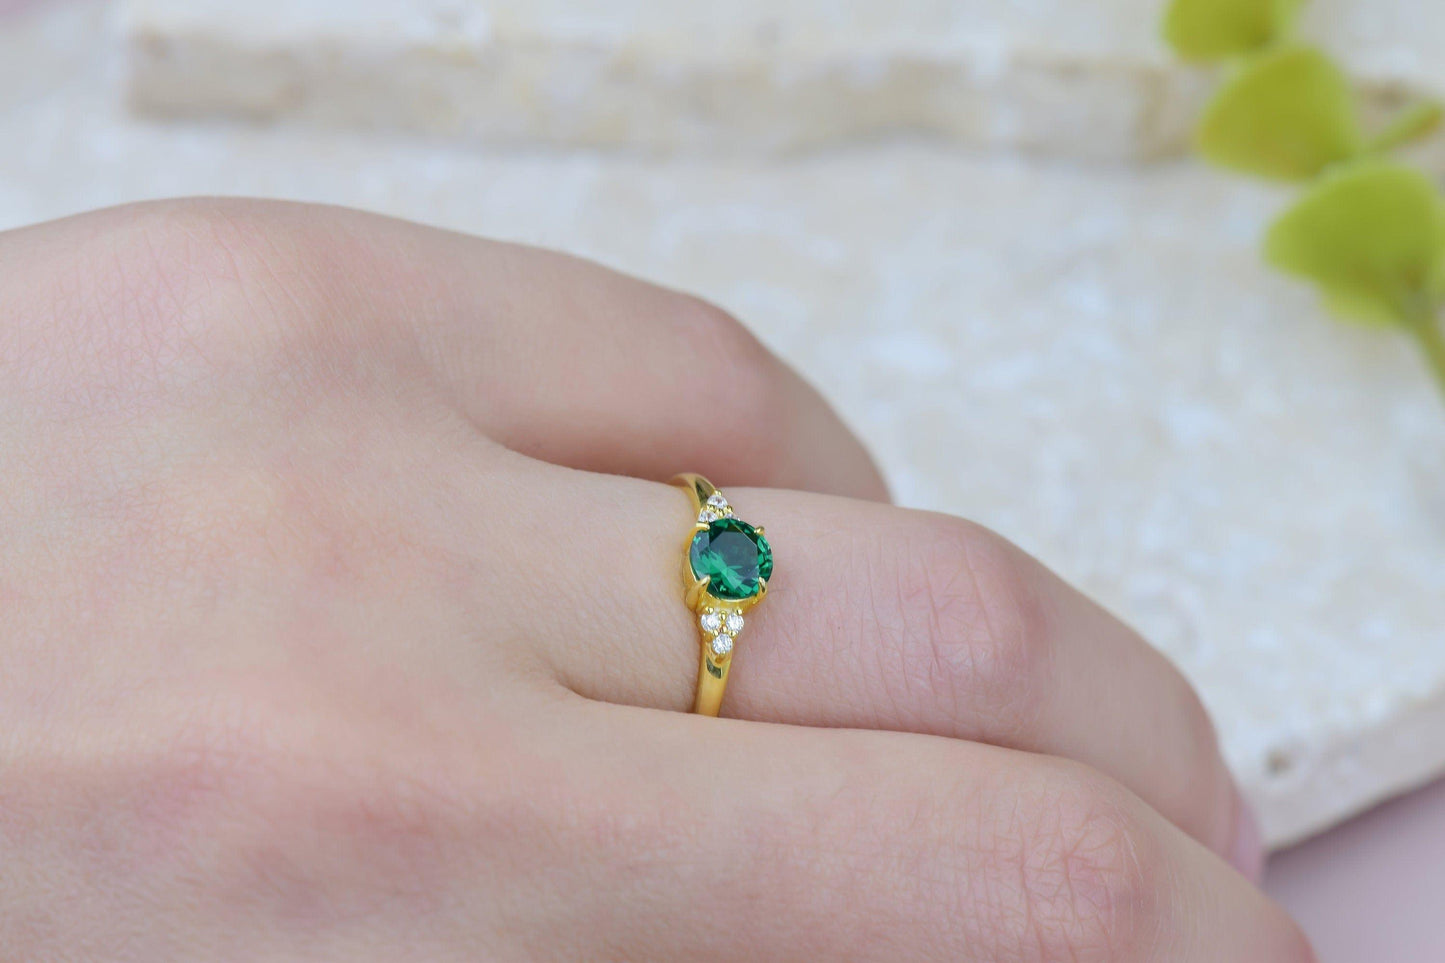 Round Cut Emerald Engagement 14K Gold Dainty Wedding Anniversary Ring Mothers Day Gift - JBR Jeweler